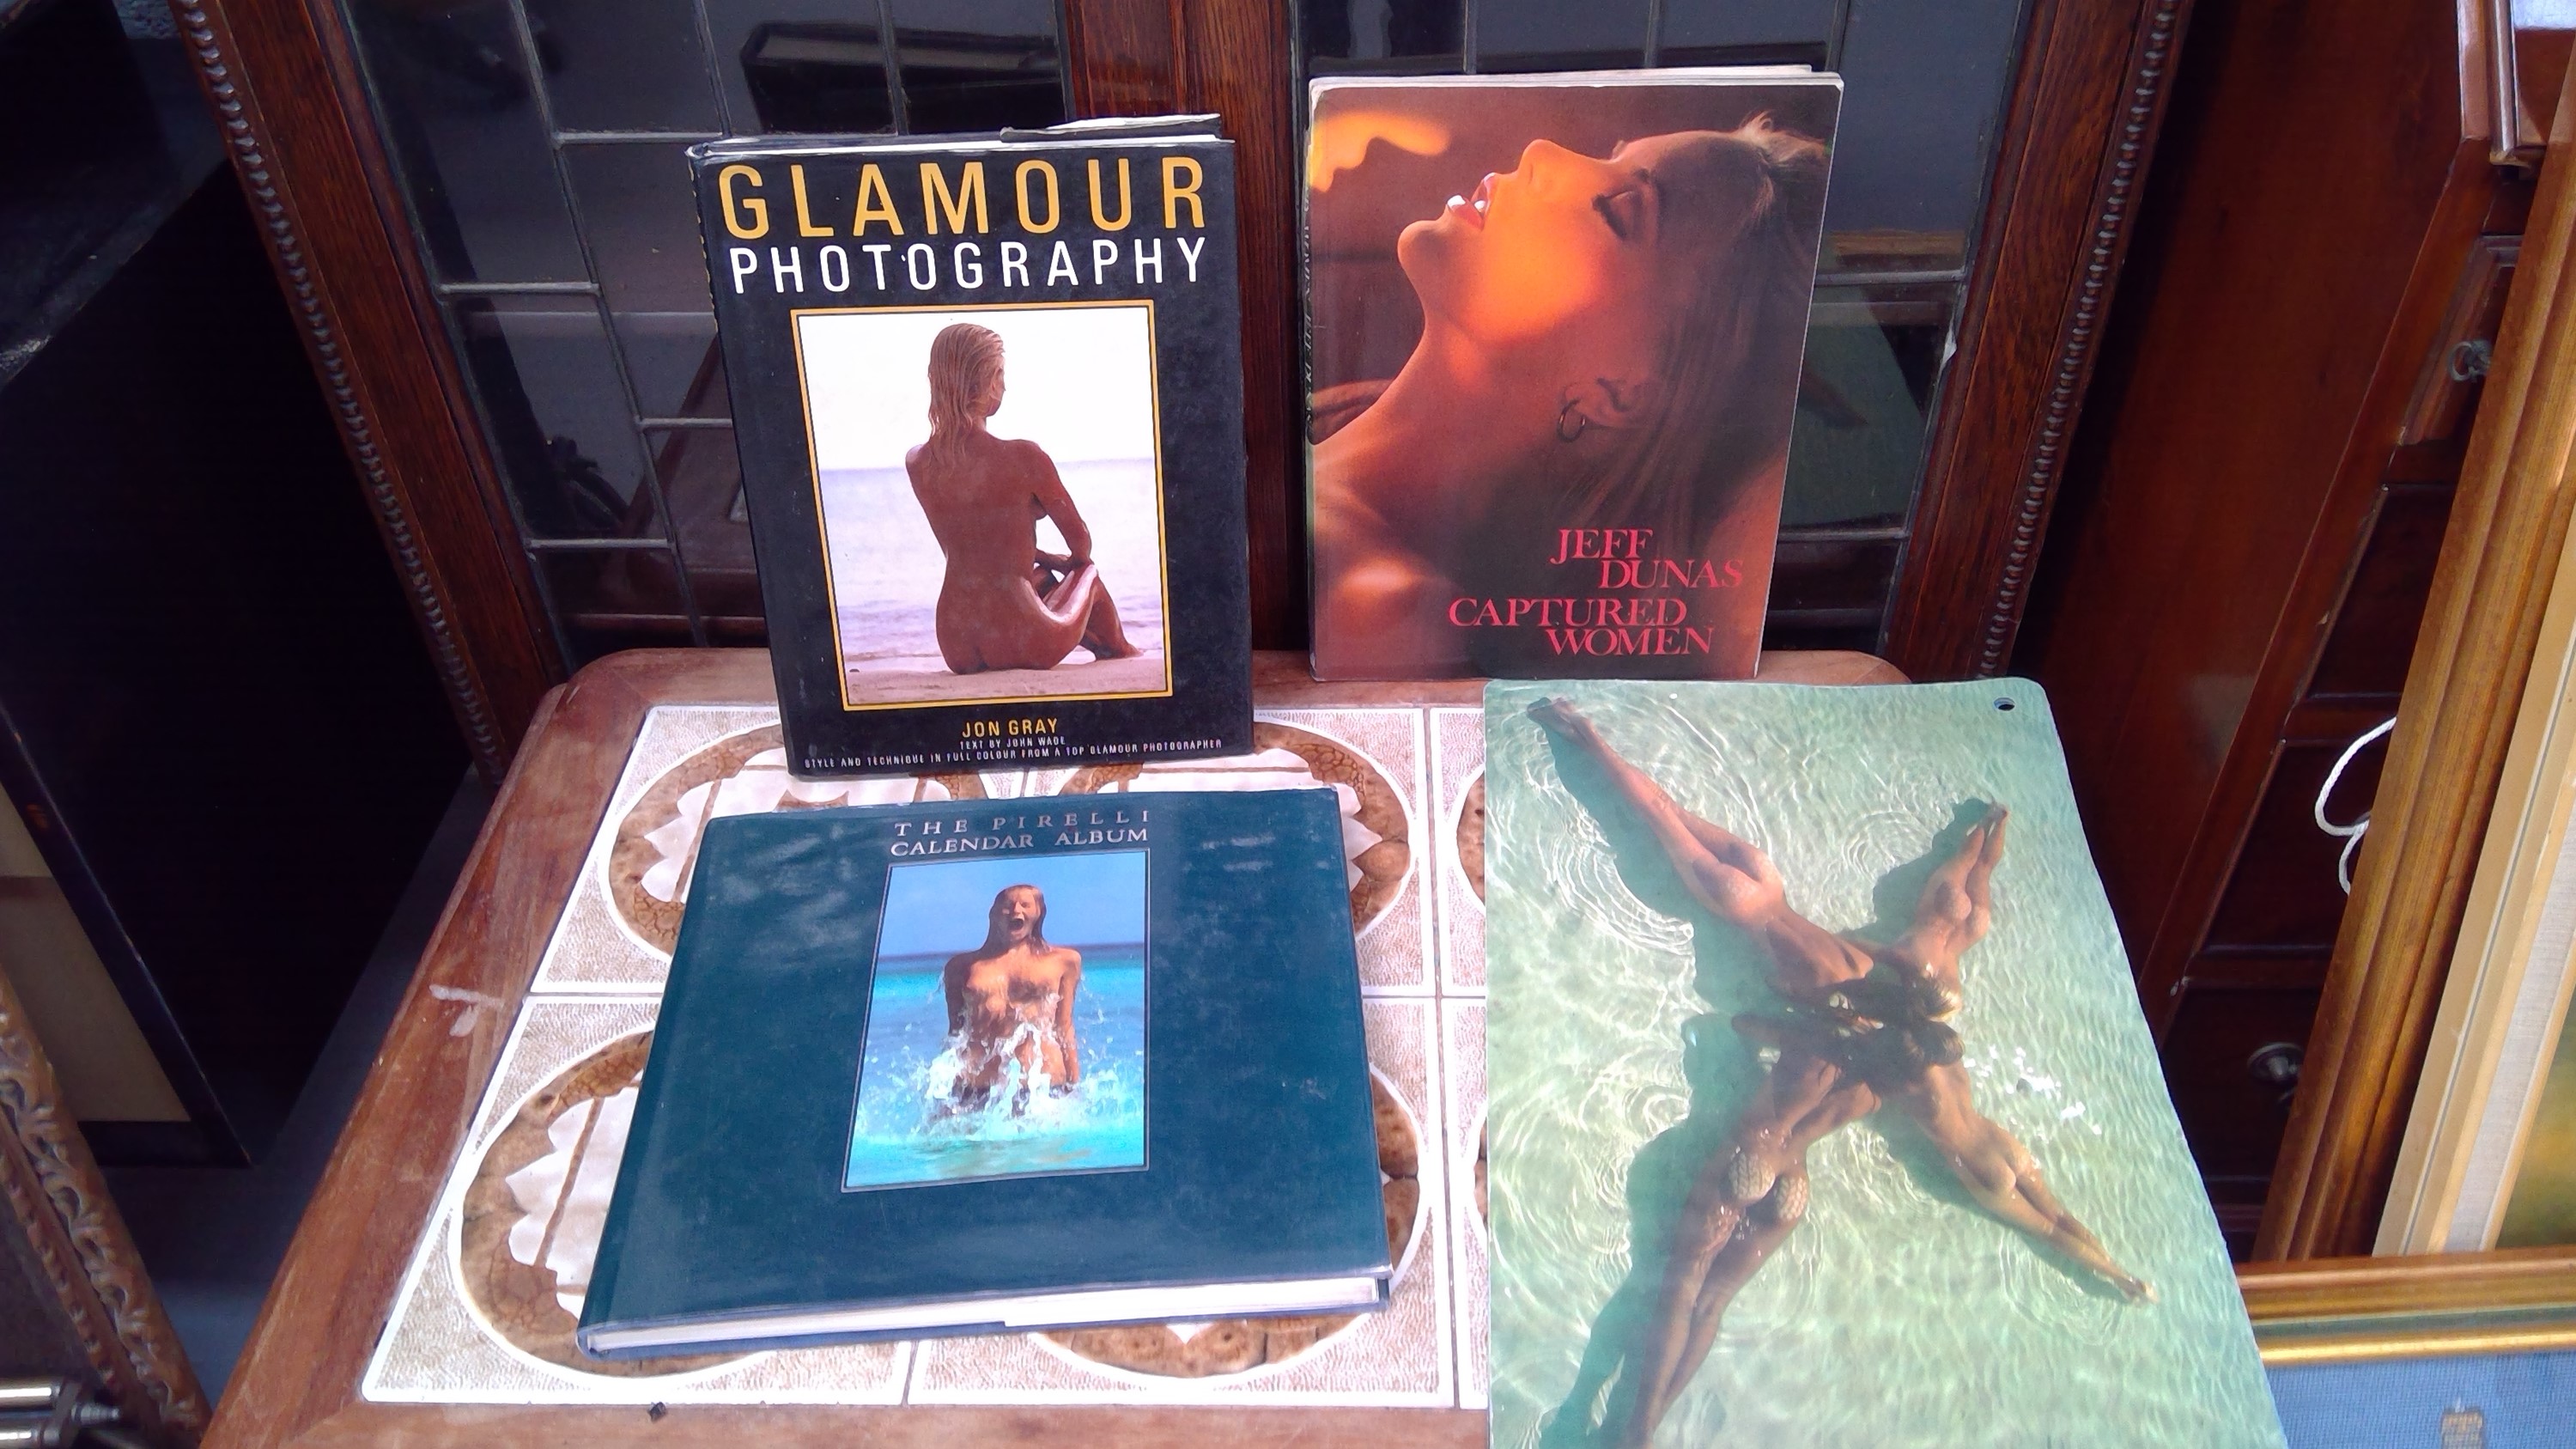 A collection of glamour modeling books, along with a box containing a wide variety of other books.